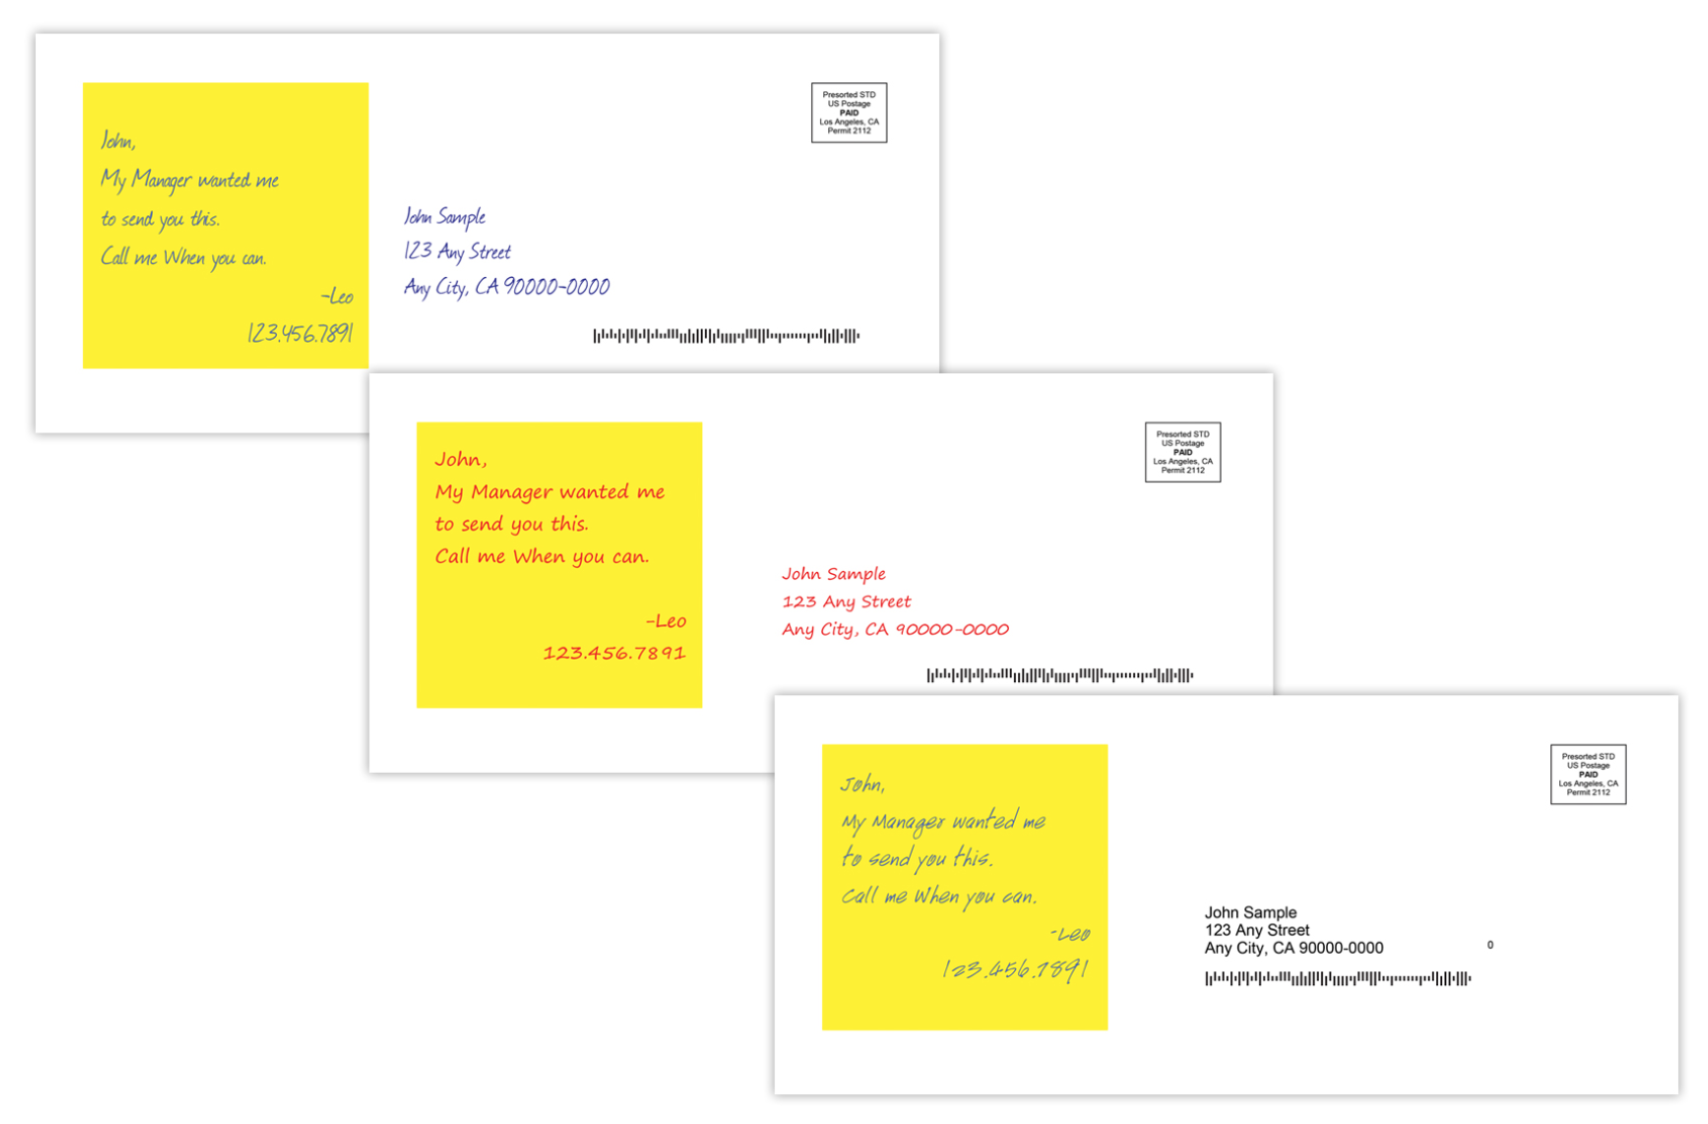 Post it Note direct mailer.png